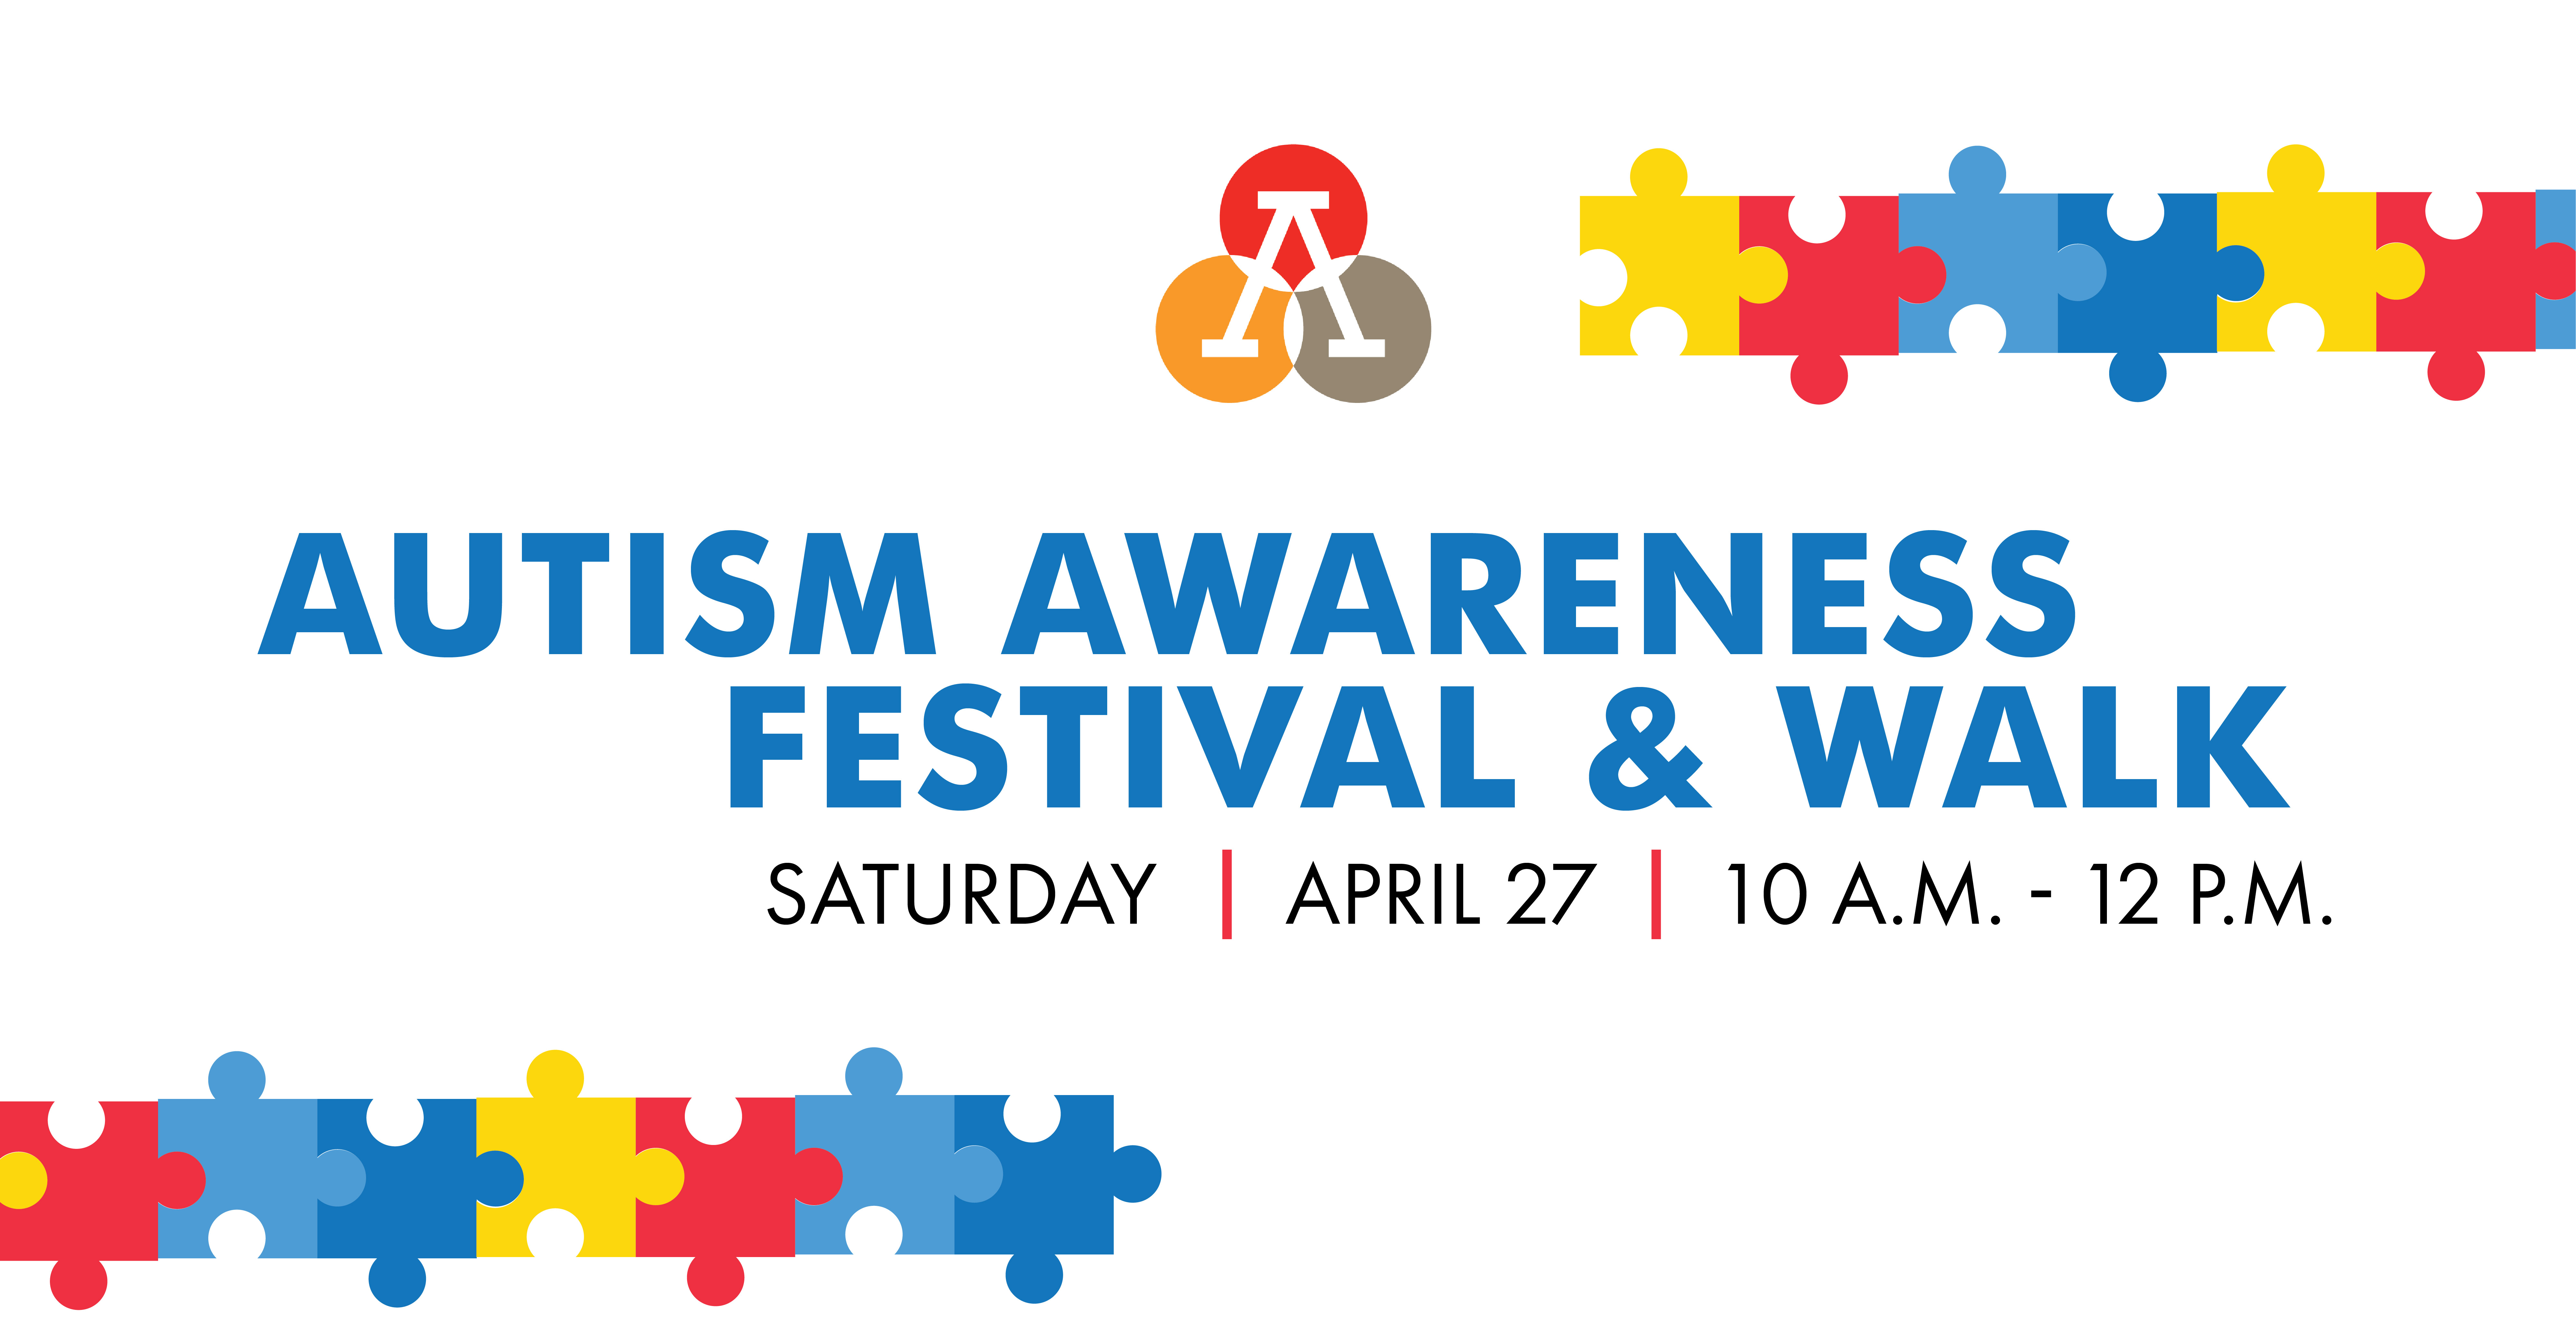 Join us Saturday, April 27 from 10 a.m. to noon at Athlos Academy of Jefferson Parish! There will be various resources provided by community organizations, a parent open forum, Sensory Stations and an optional organized walk for Autism Awareness.